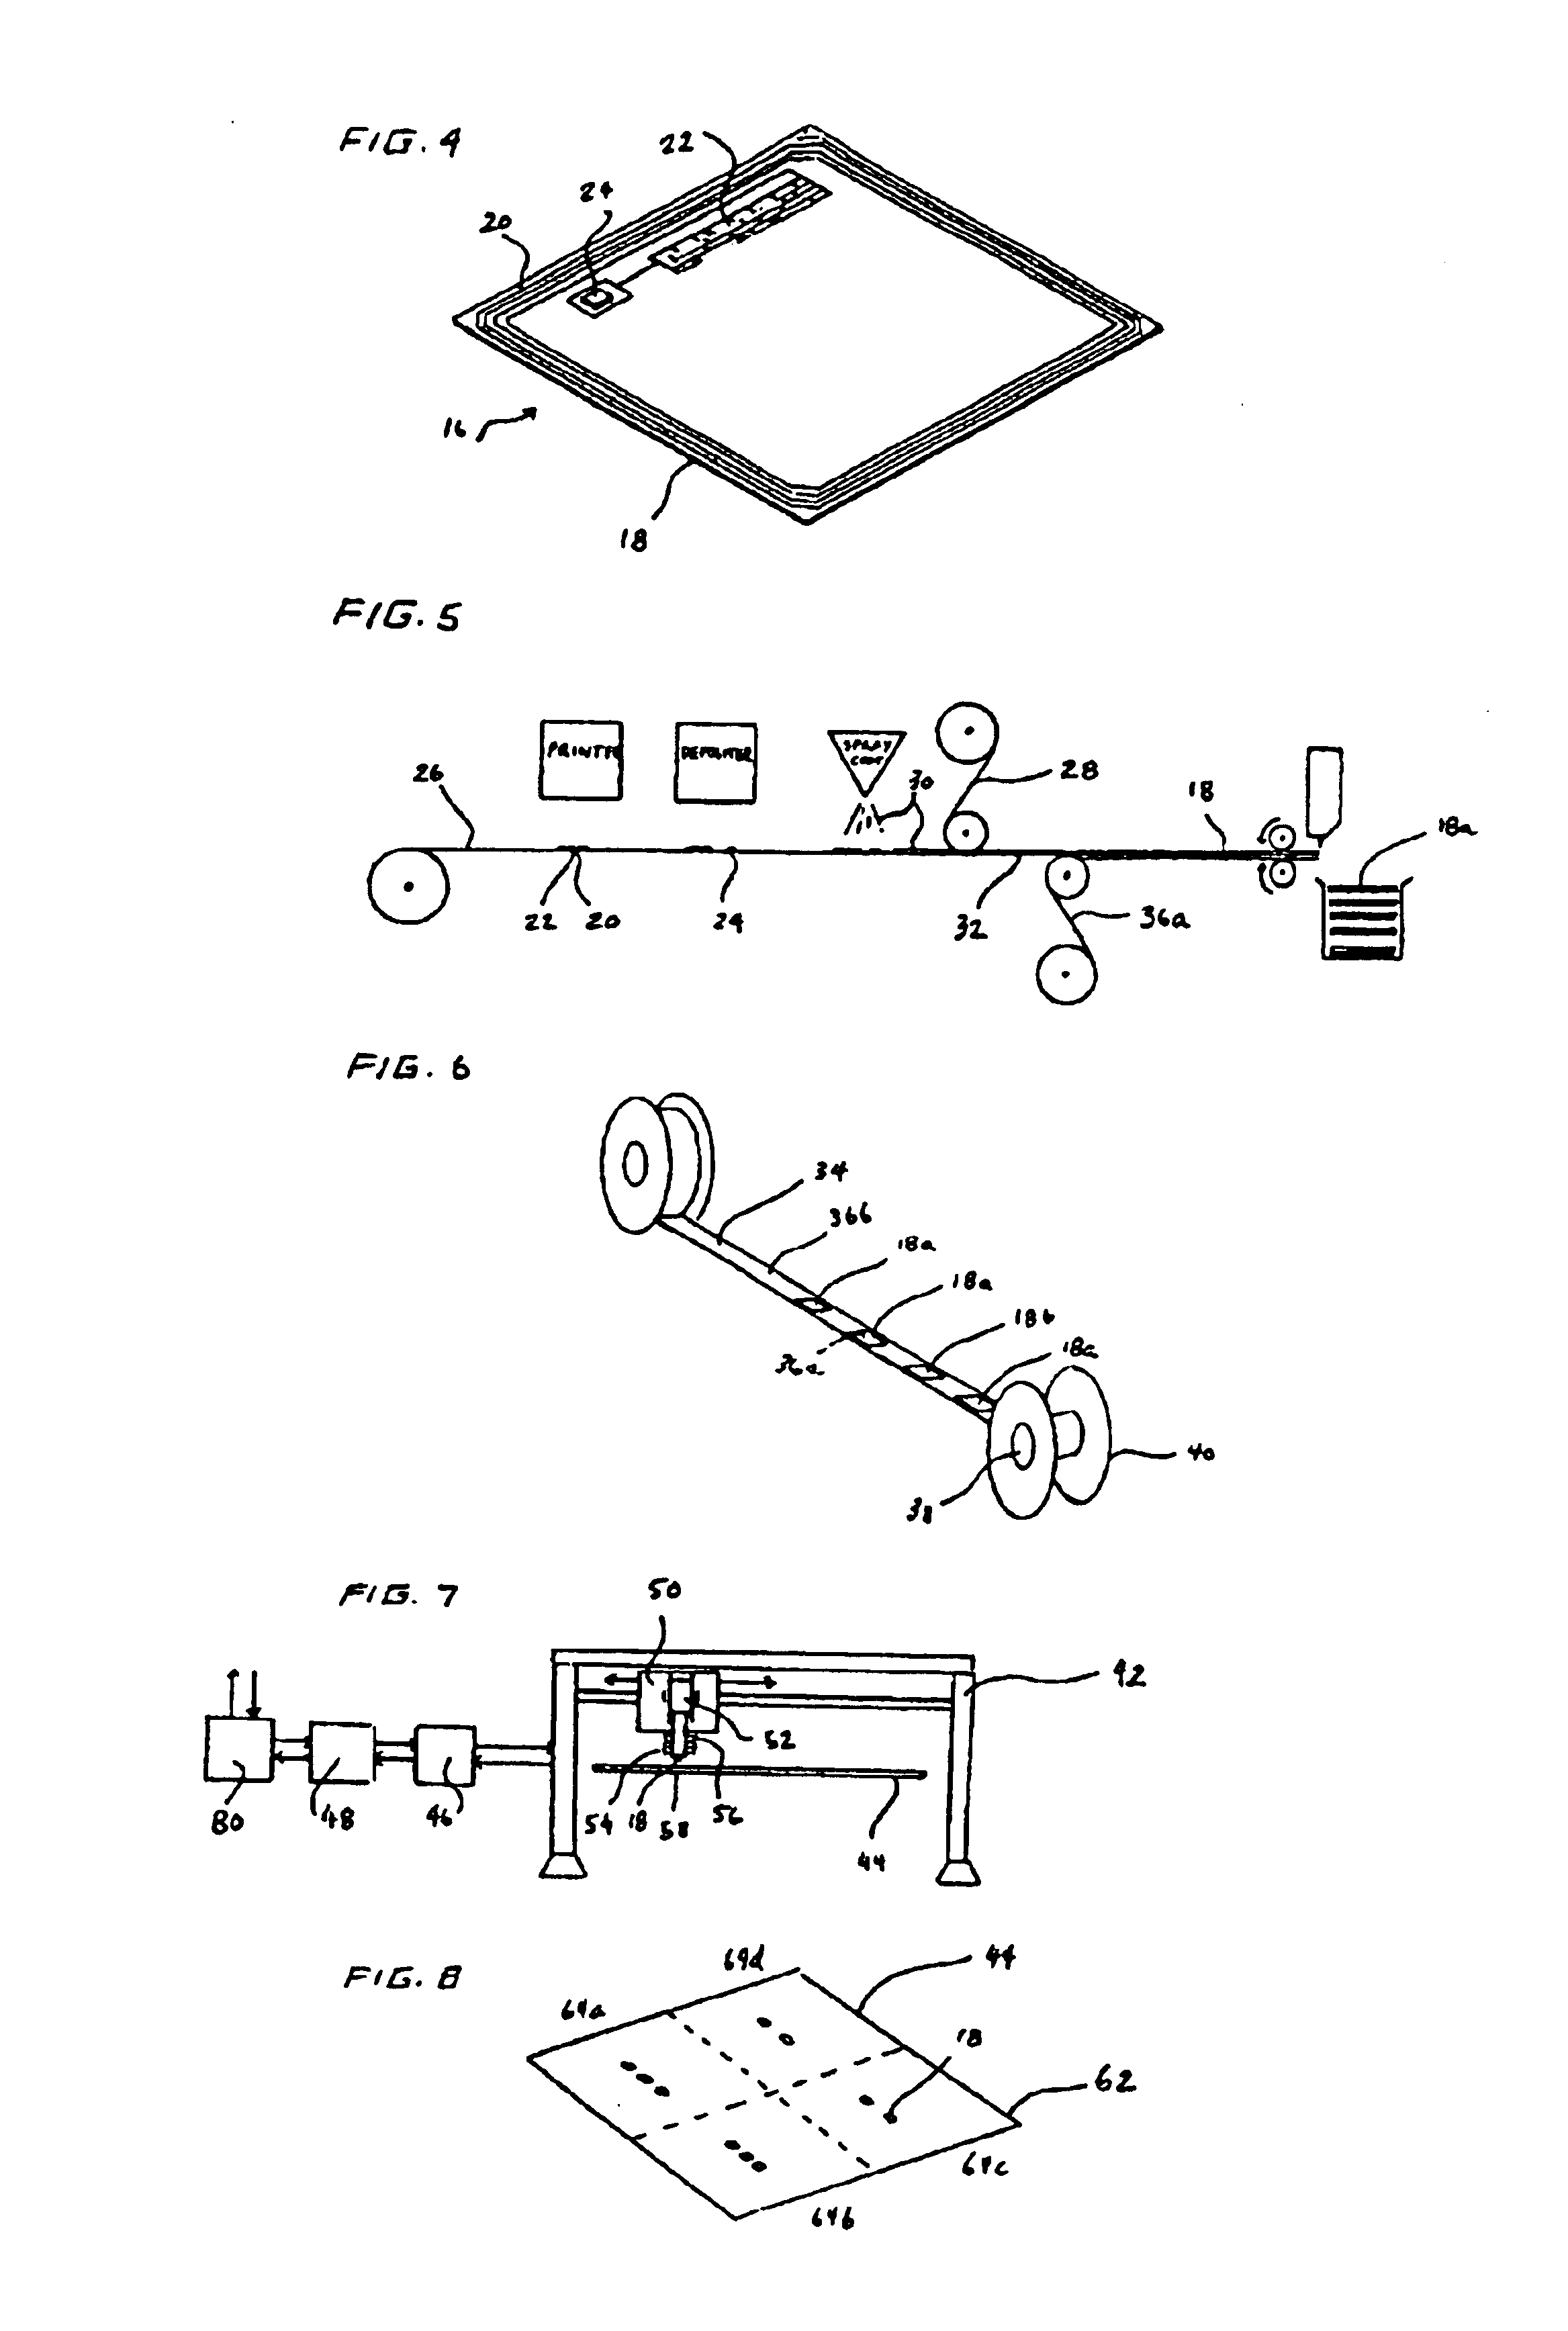 Thermoformed apparatus having a communications device